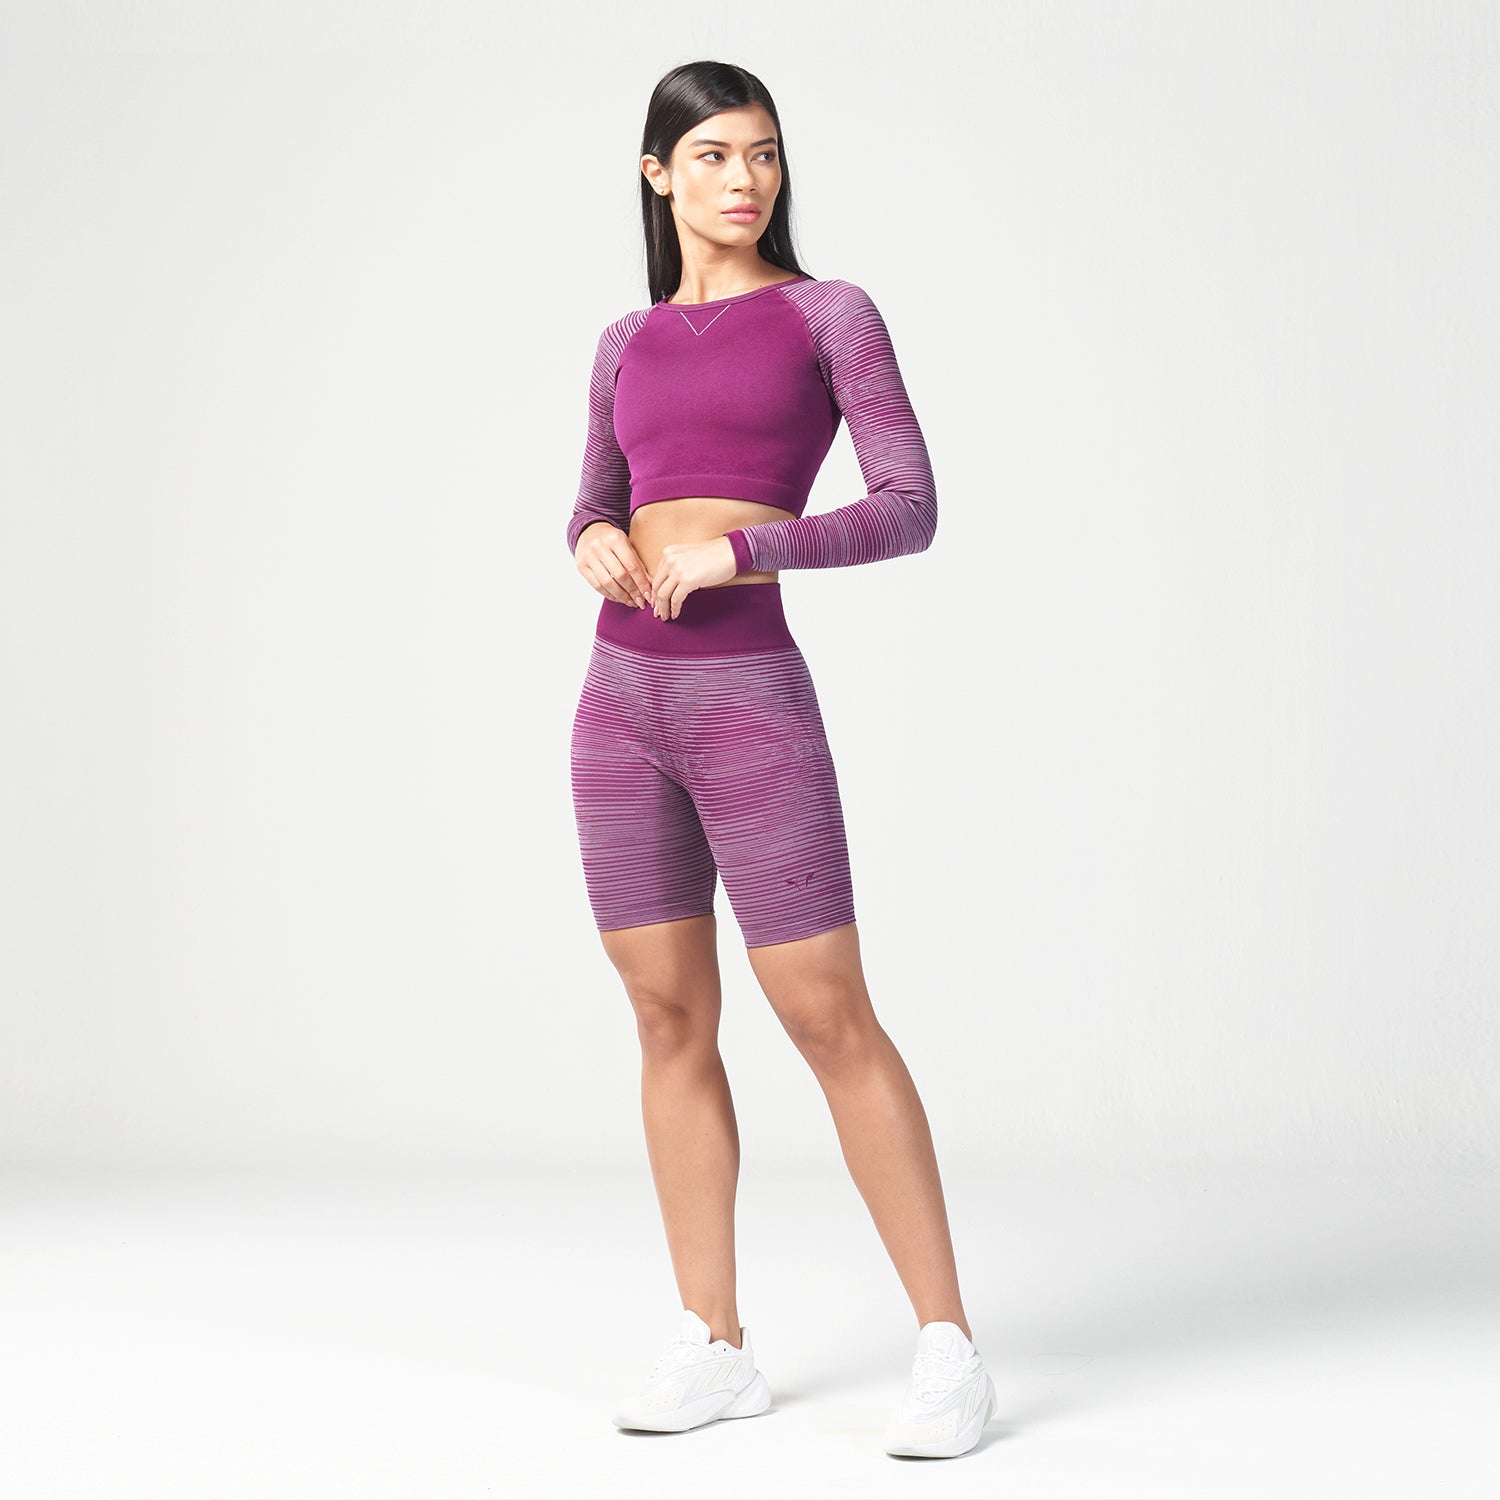 squatwolf-workout-clothes-infinity-stripe-seamless-crop-top-dark-purple-gym-t-shirts-for-women